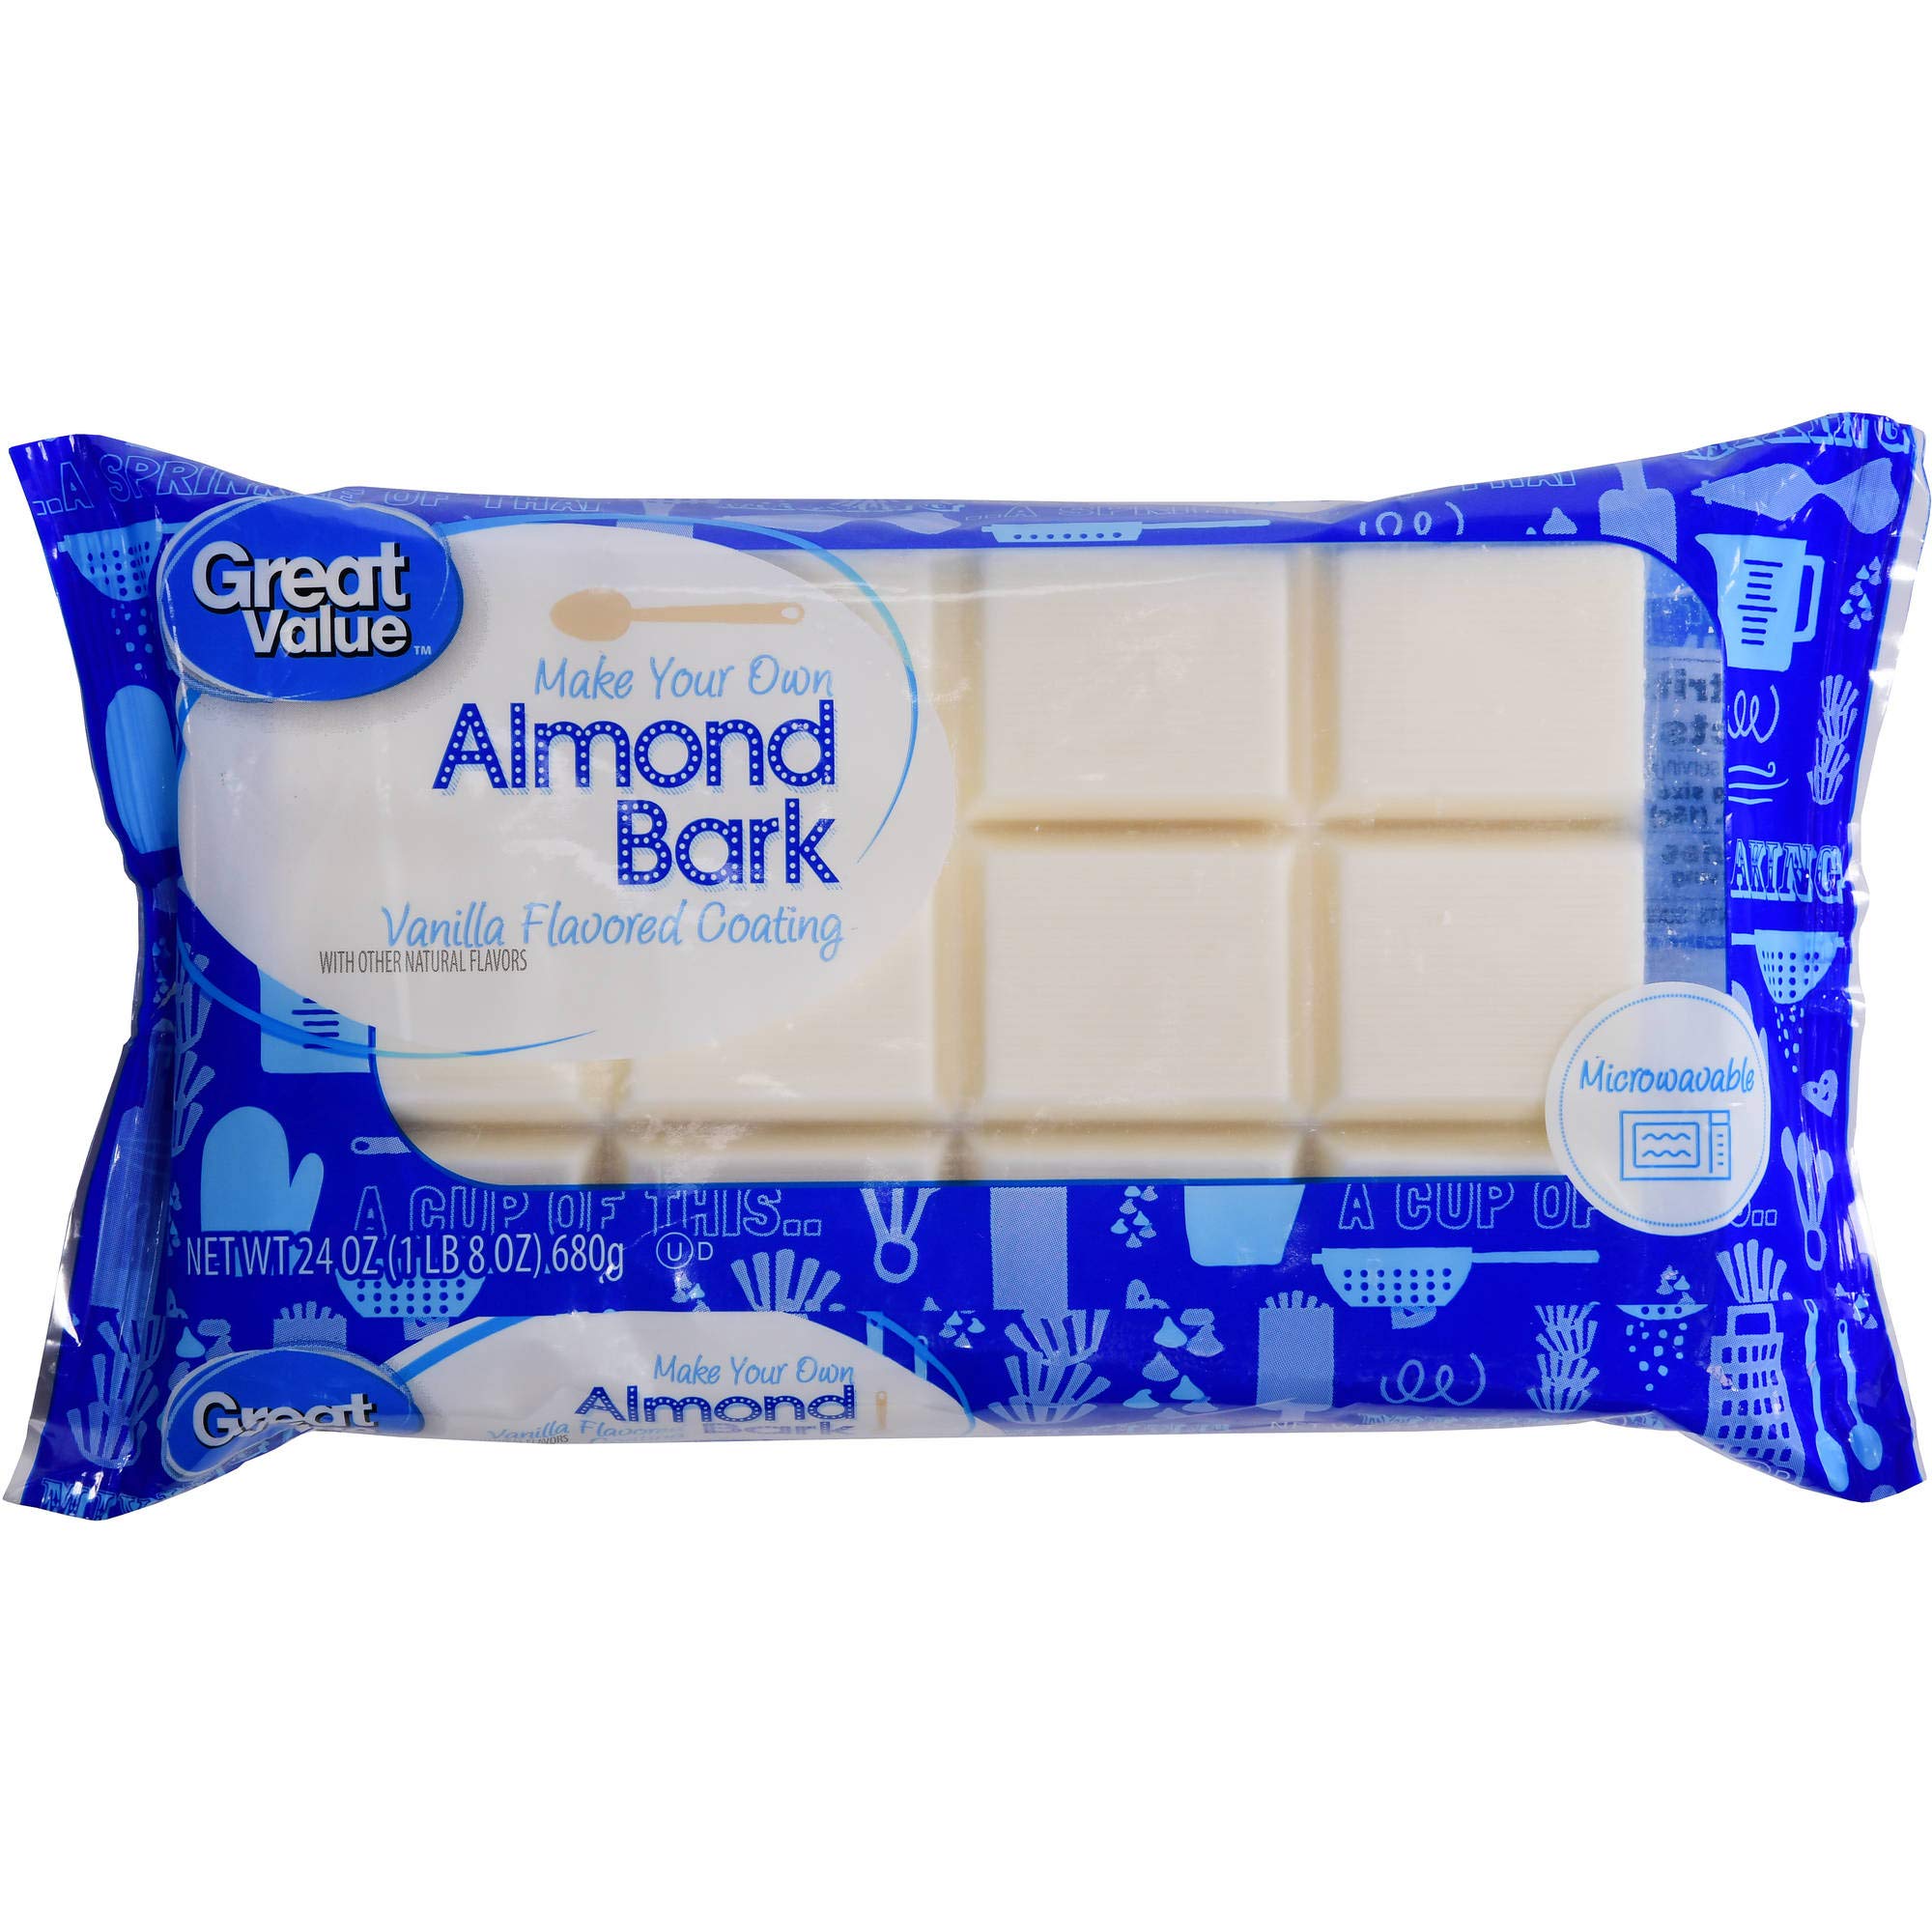 Great Value Make Your Own Almond Bark, Microwaveable Vanilla Coating for Baking, Toppings, Sweets - 2 Pk (3 lbs)